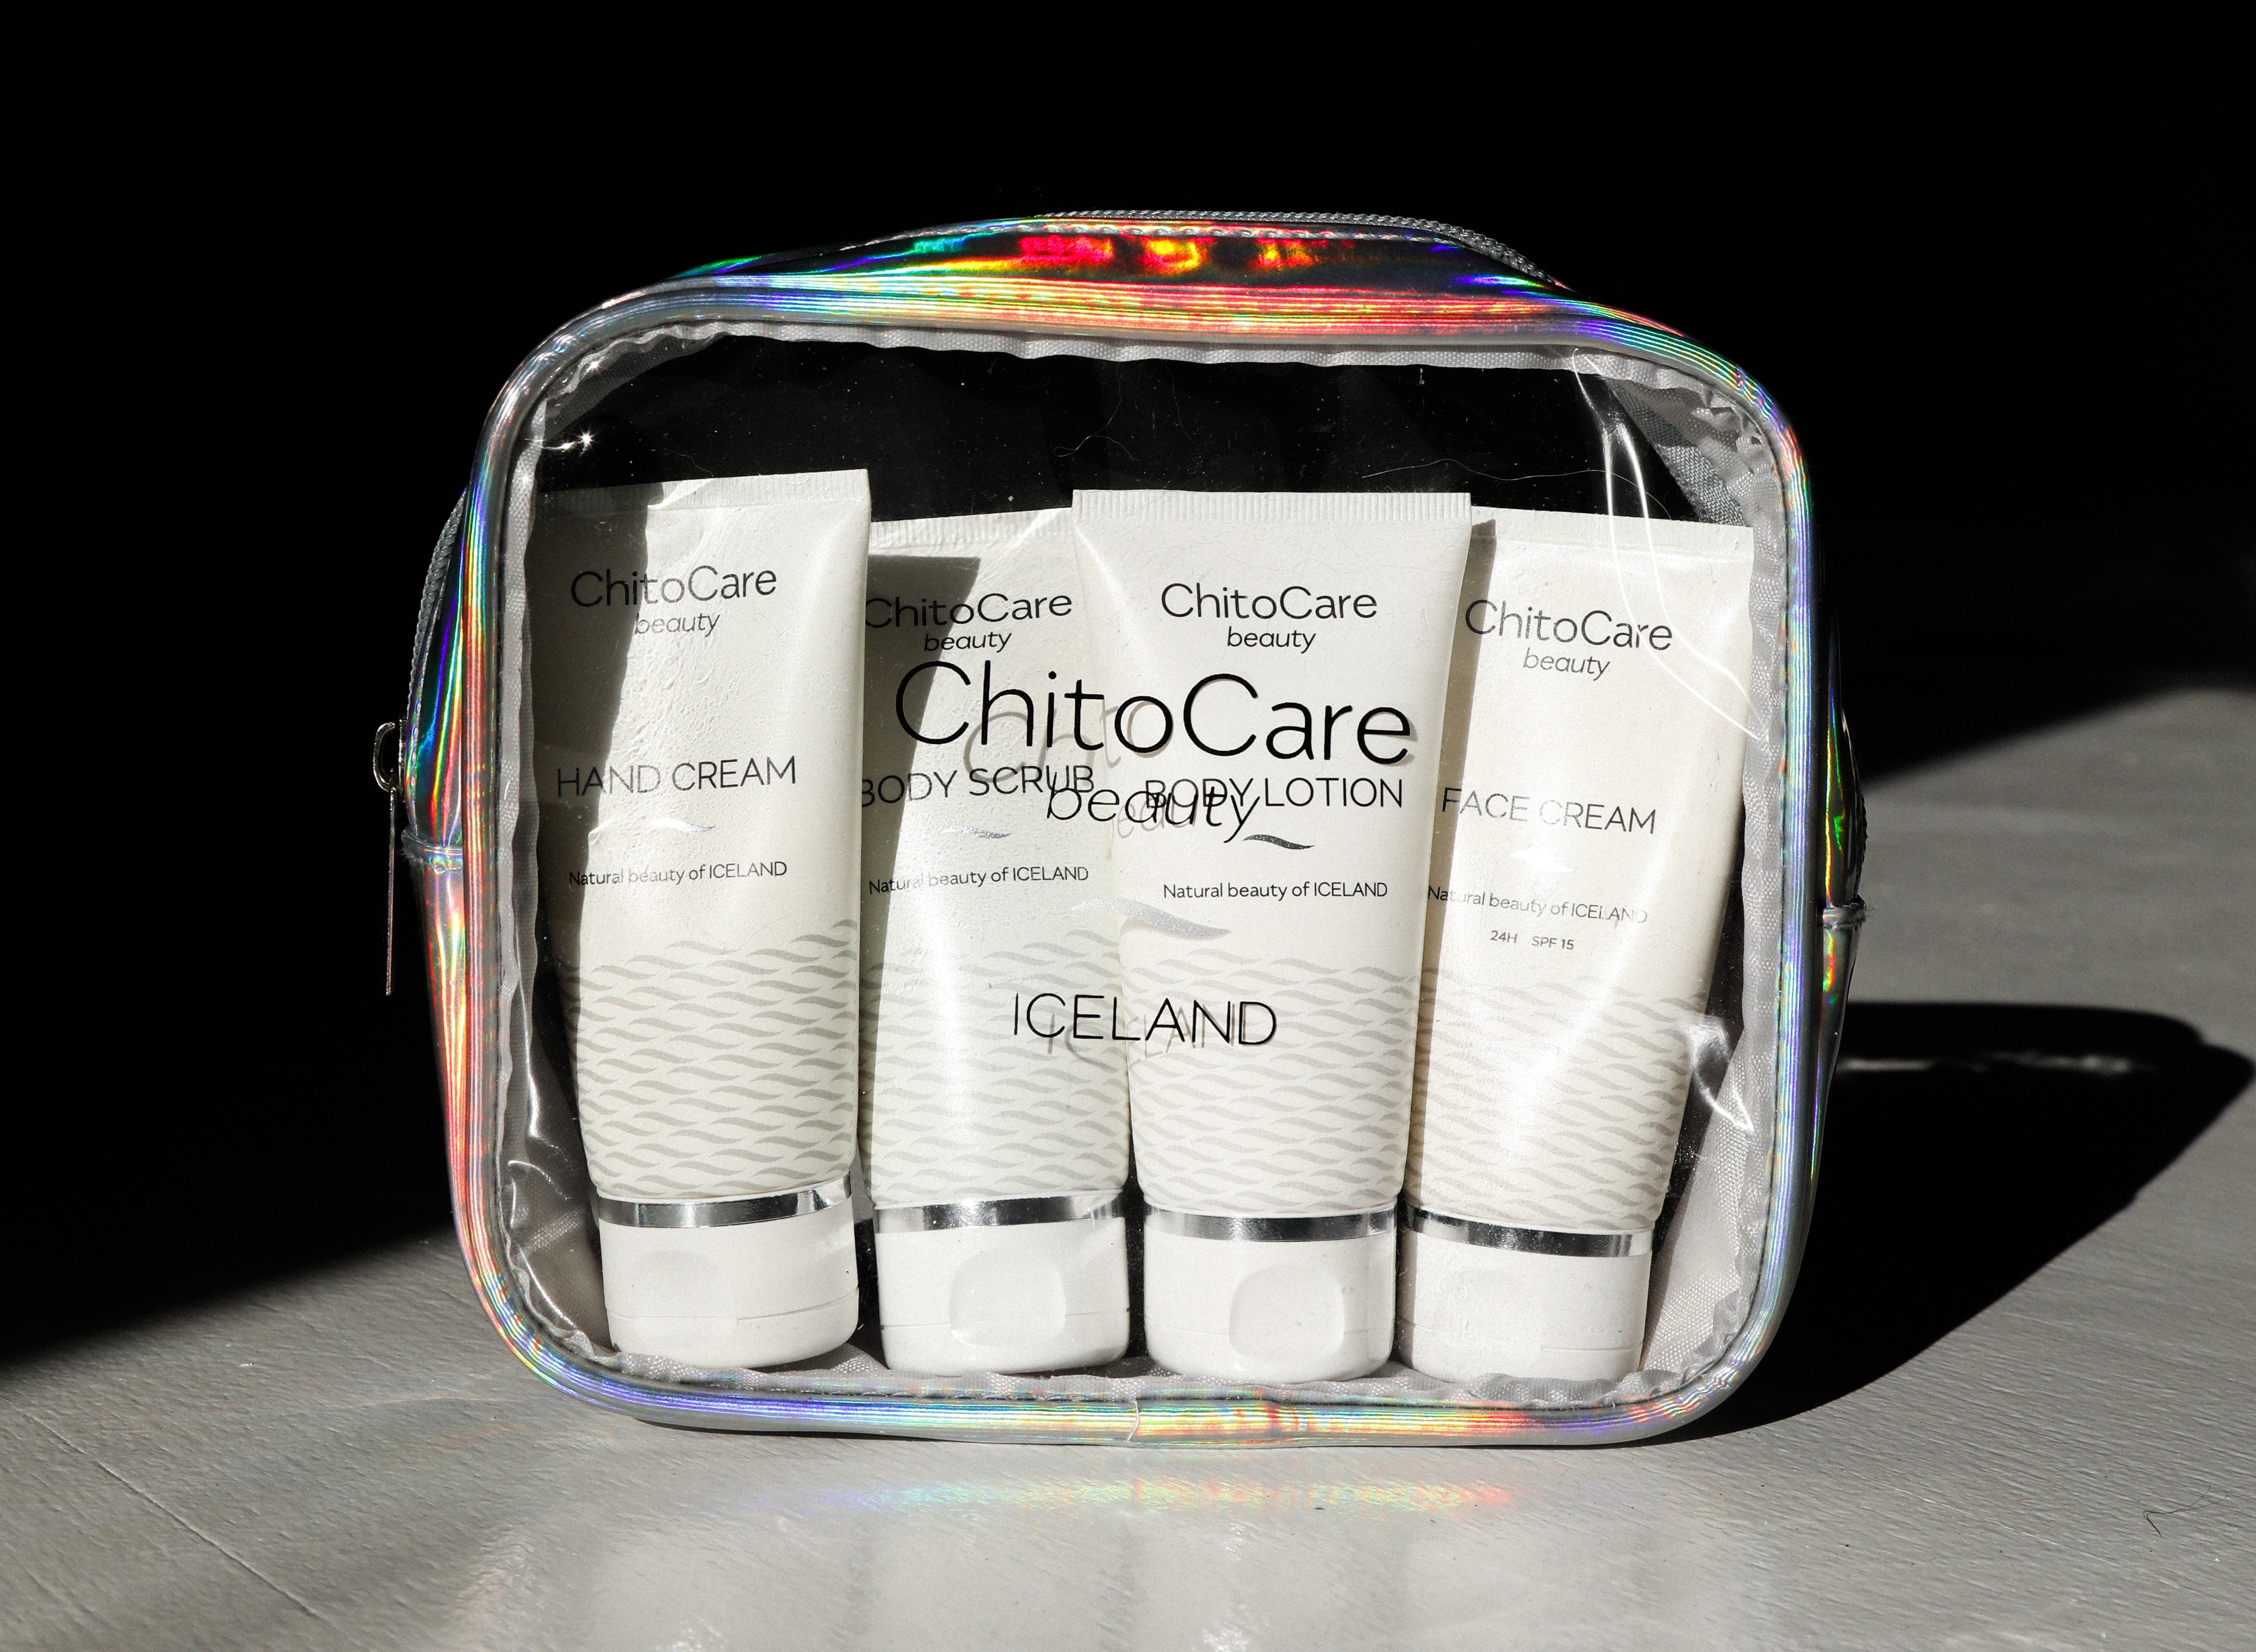 Glow On The Go: ChitoCare Beauty Skin Care Travel Kit